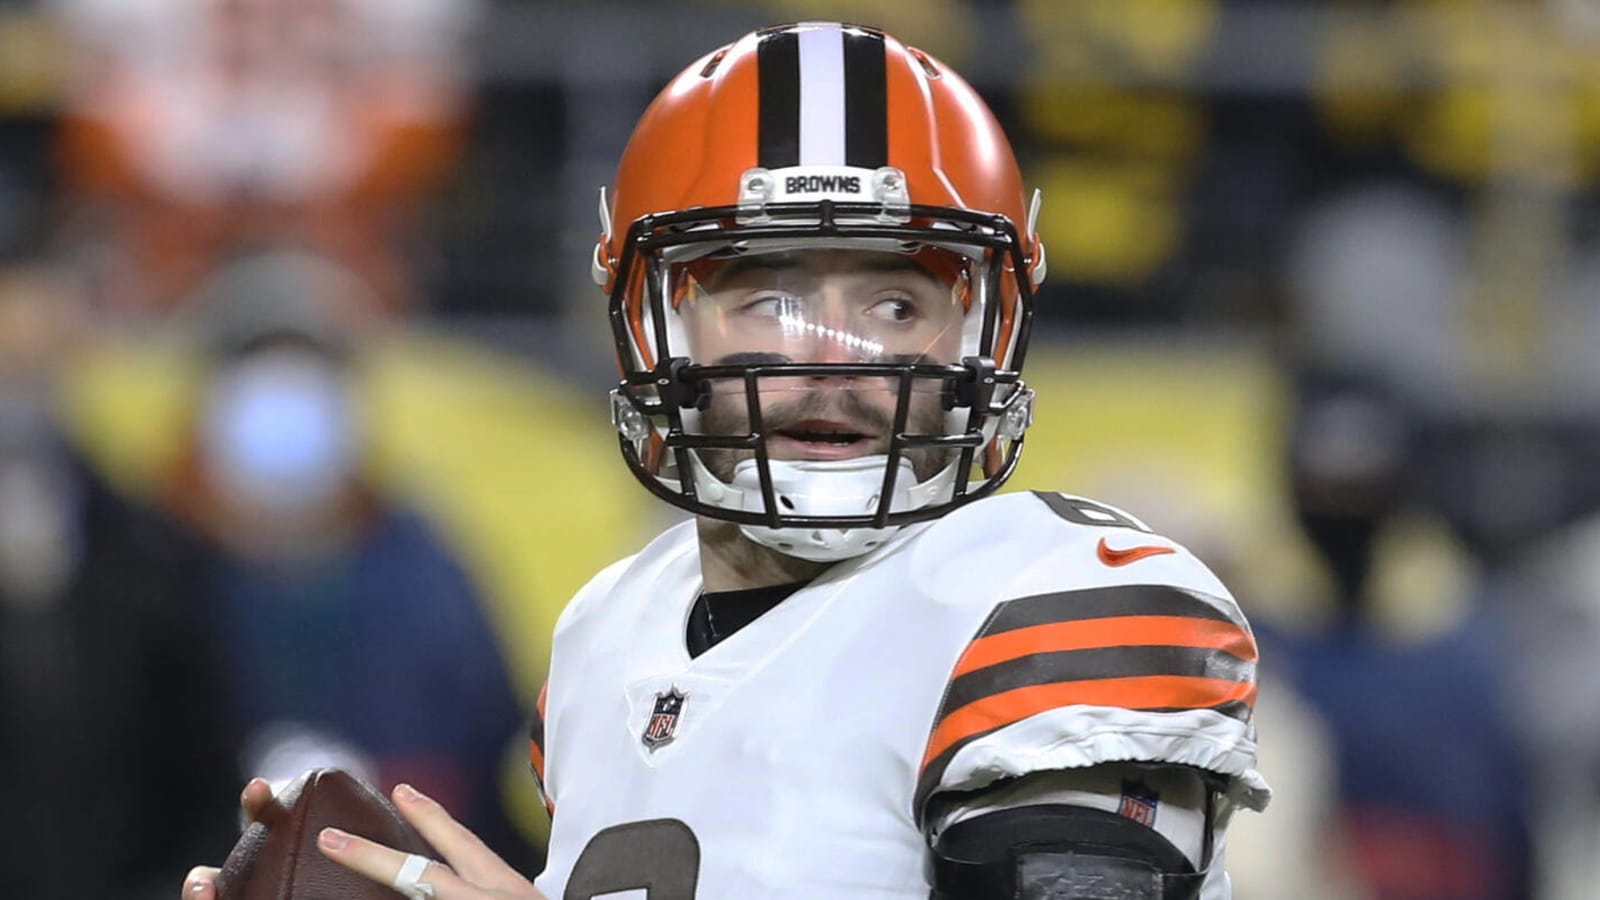 Report: Buccaneers have evaluated Browns QB Baker Mayfield